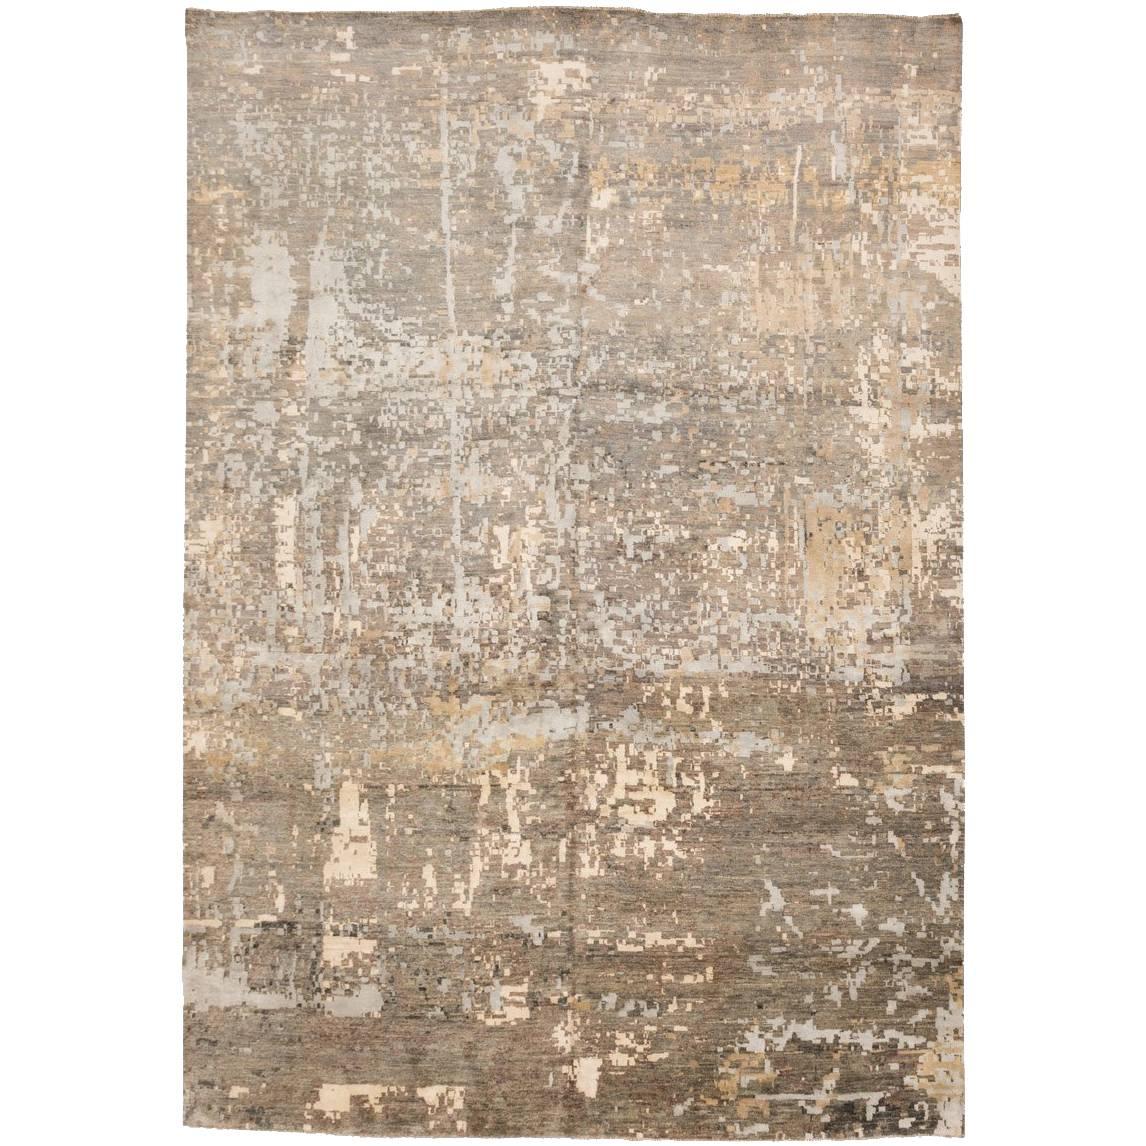 Contemporary Design Rug in Gray and Beige Tones